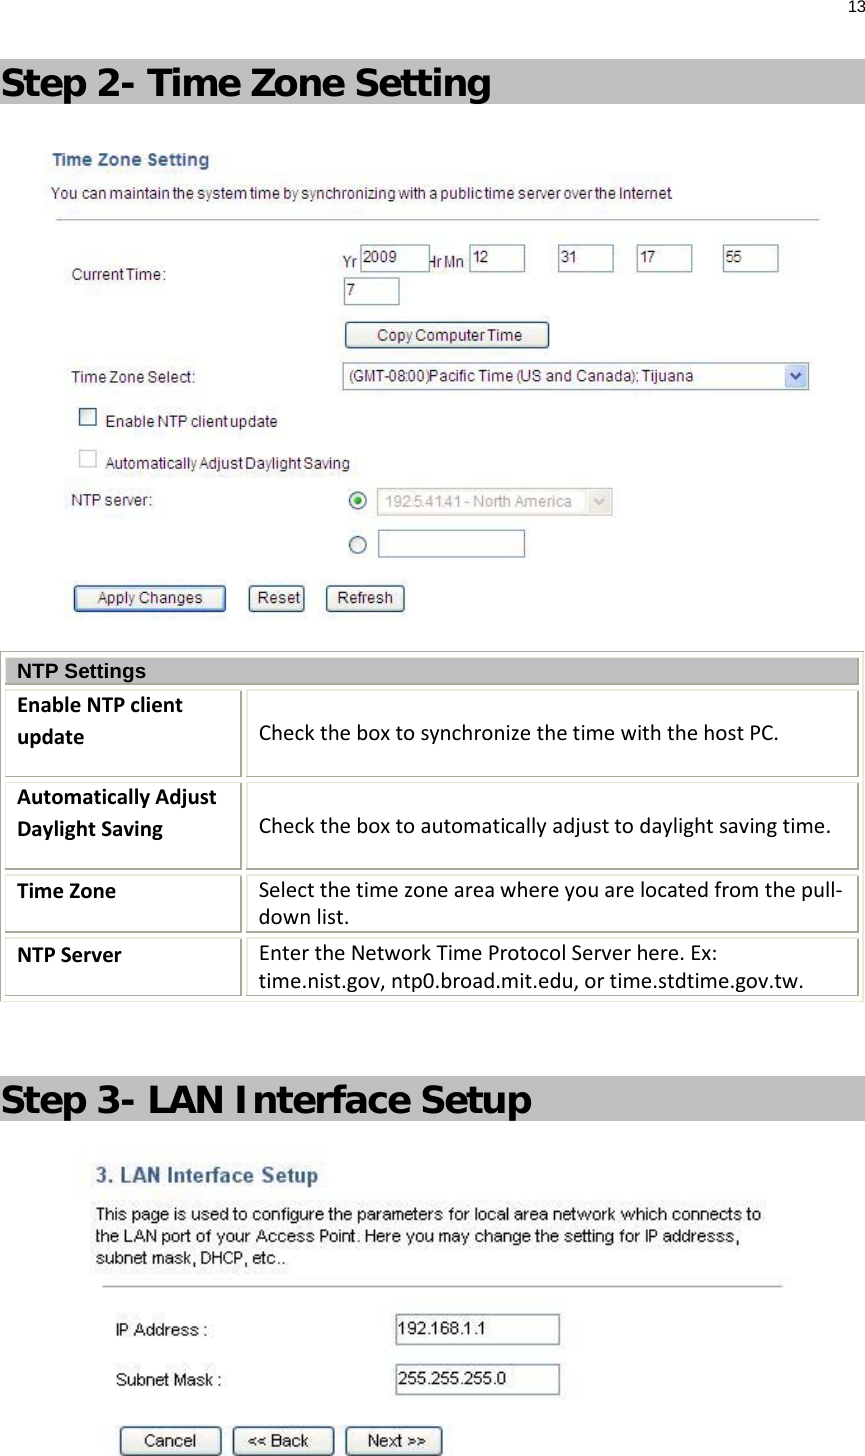 13  Step 2- Time Zone Setting  NTP Settings Enable NTP client update Check the box to synchronize the time with the host PC. Automatically Adjust Daylight Saving Check the box to automatically adjust to daylight saving time. Time Zone Select the time zone area where you are located from the pull-down list. NTP Server Enter the Network Time Protocol Server here. Ex: time.nist.gov, ntp0.broad.mit.edu, or time.stdtime.gov.tw.  Step 3- LAN Interface Setup  